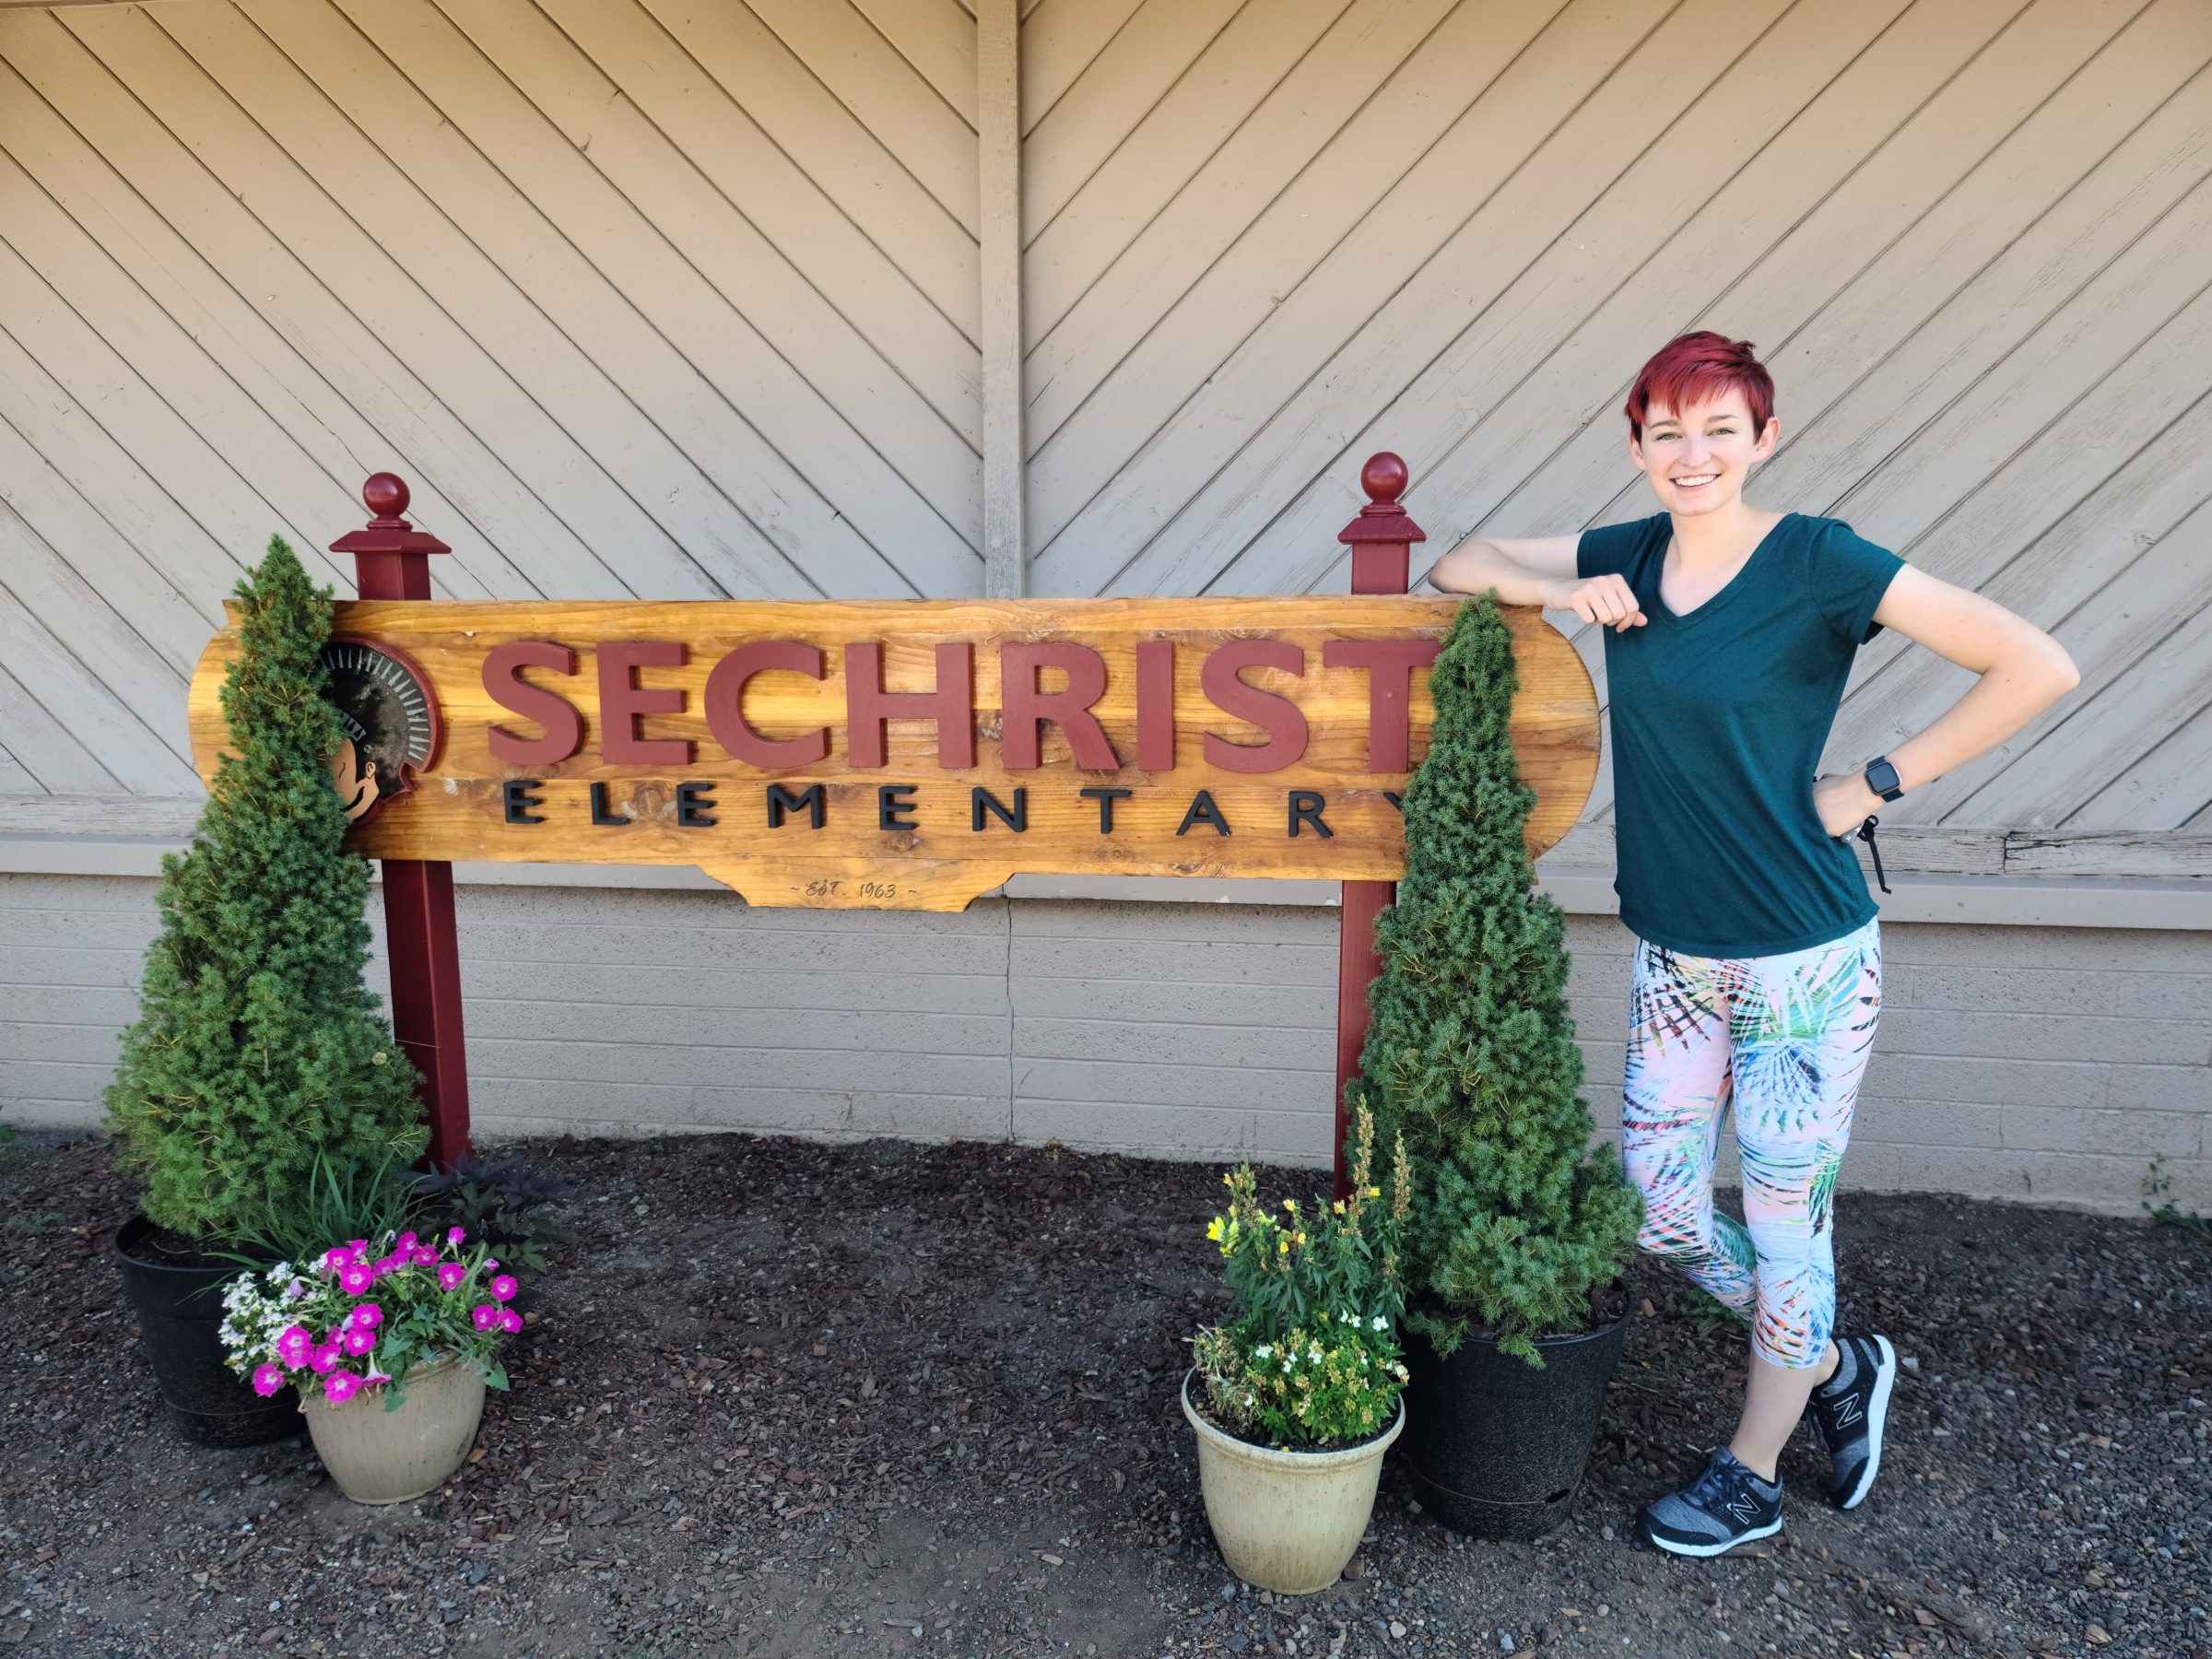 Madison Fisher, physical education teacher, posing with the Sechrist Elementary sign.